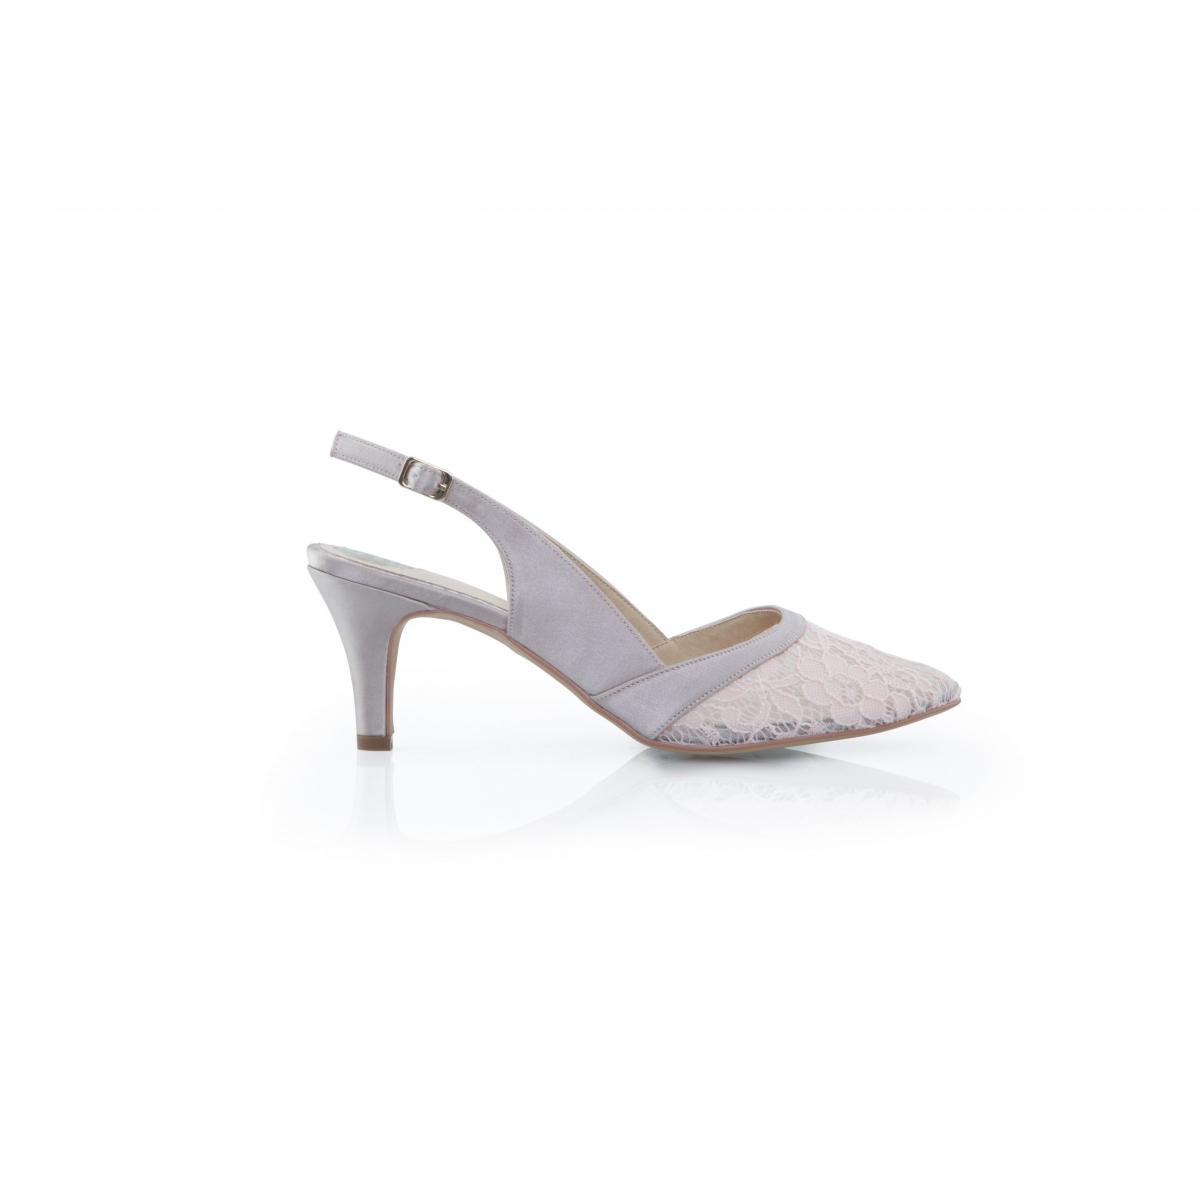 Perfect Bridal Vera Shoes - Taupe Satin/Lace 1